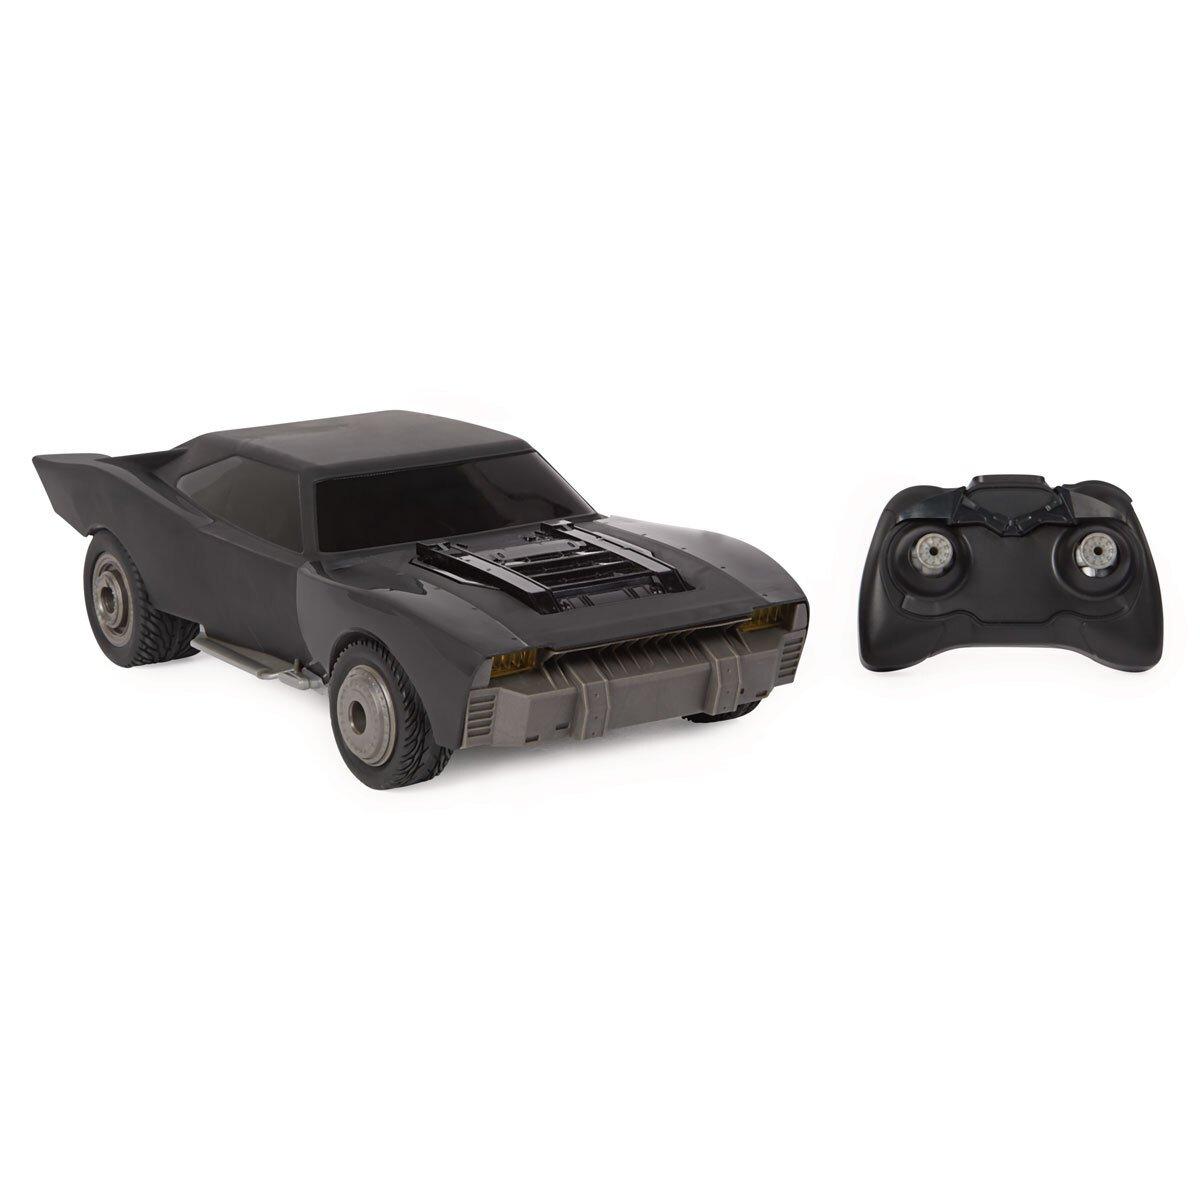 Batmobile Rc Car: Overview and Features